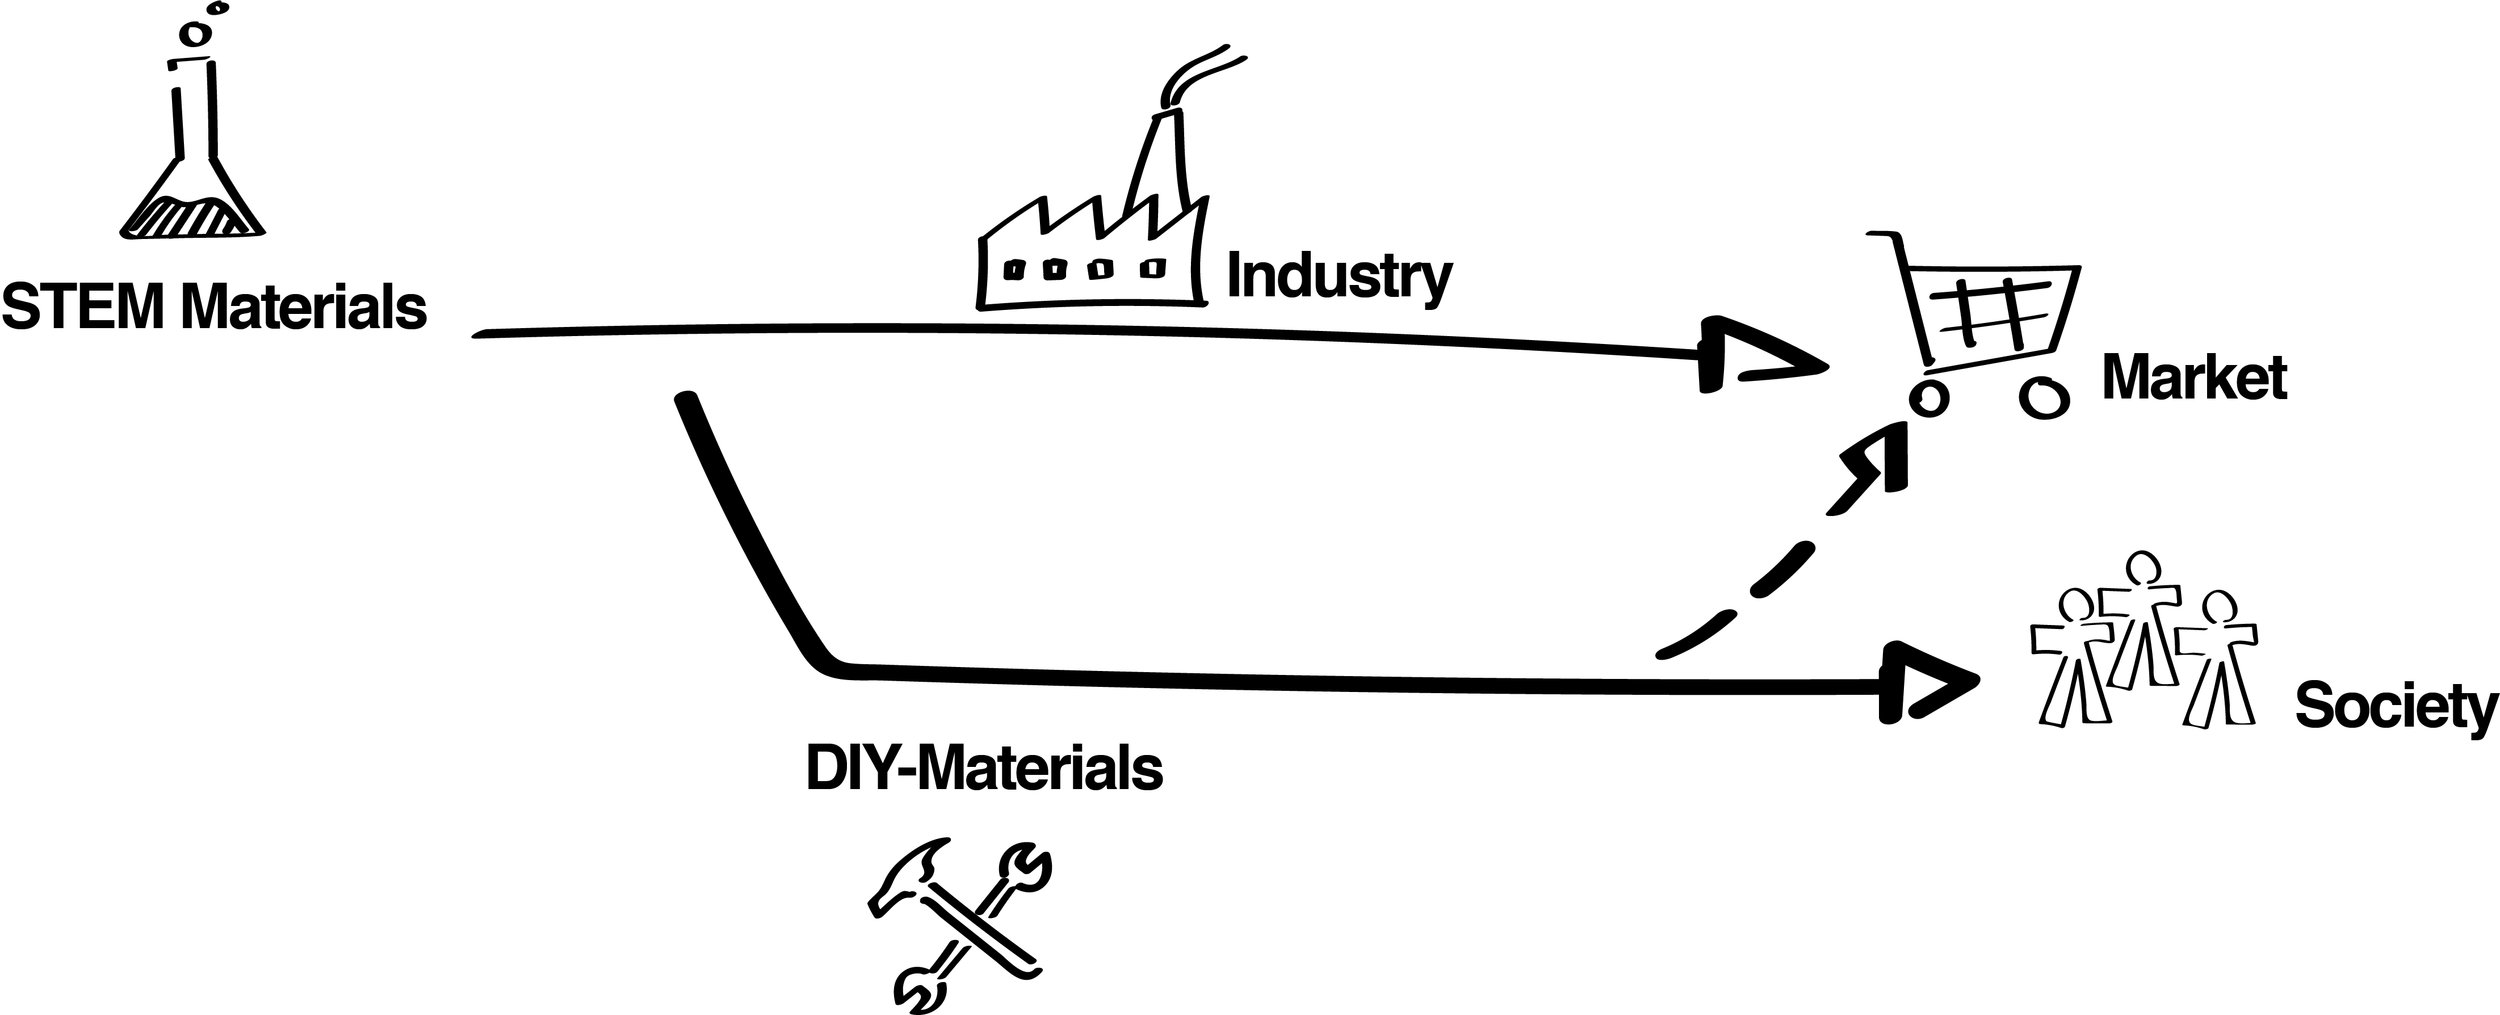 DIY-Materials as an alternative to traditional materials developed by science.